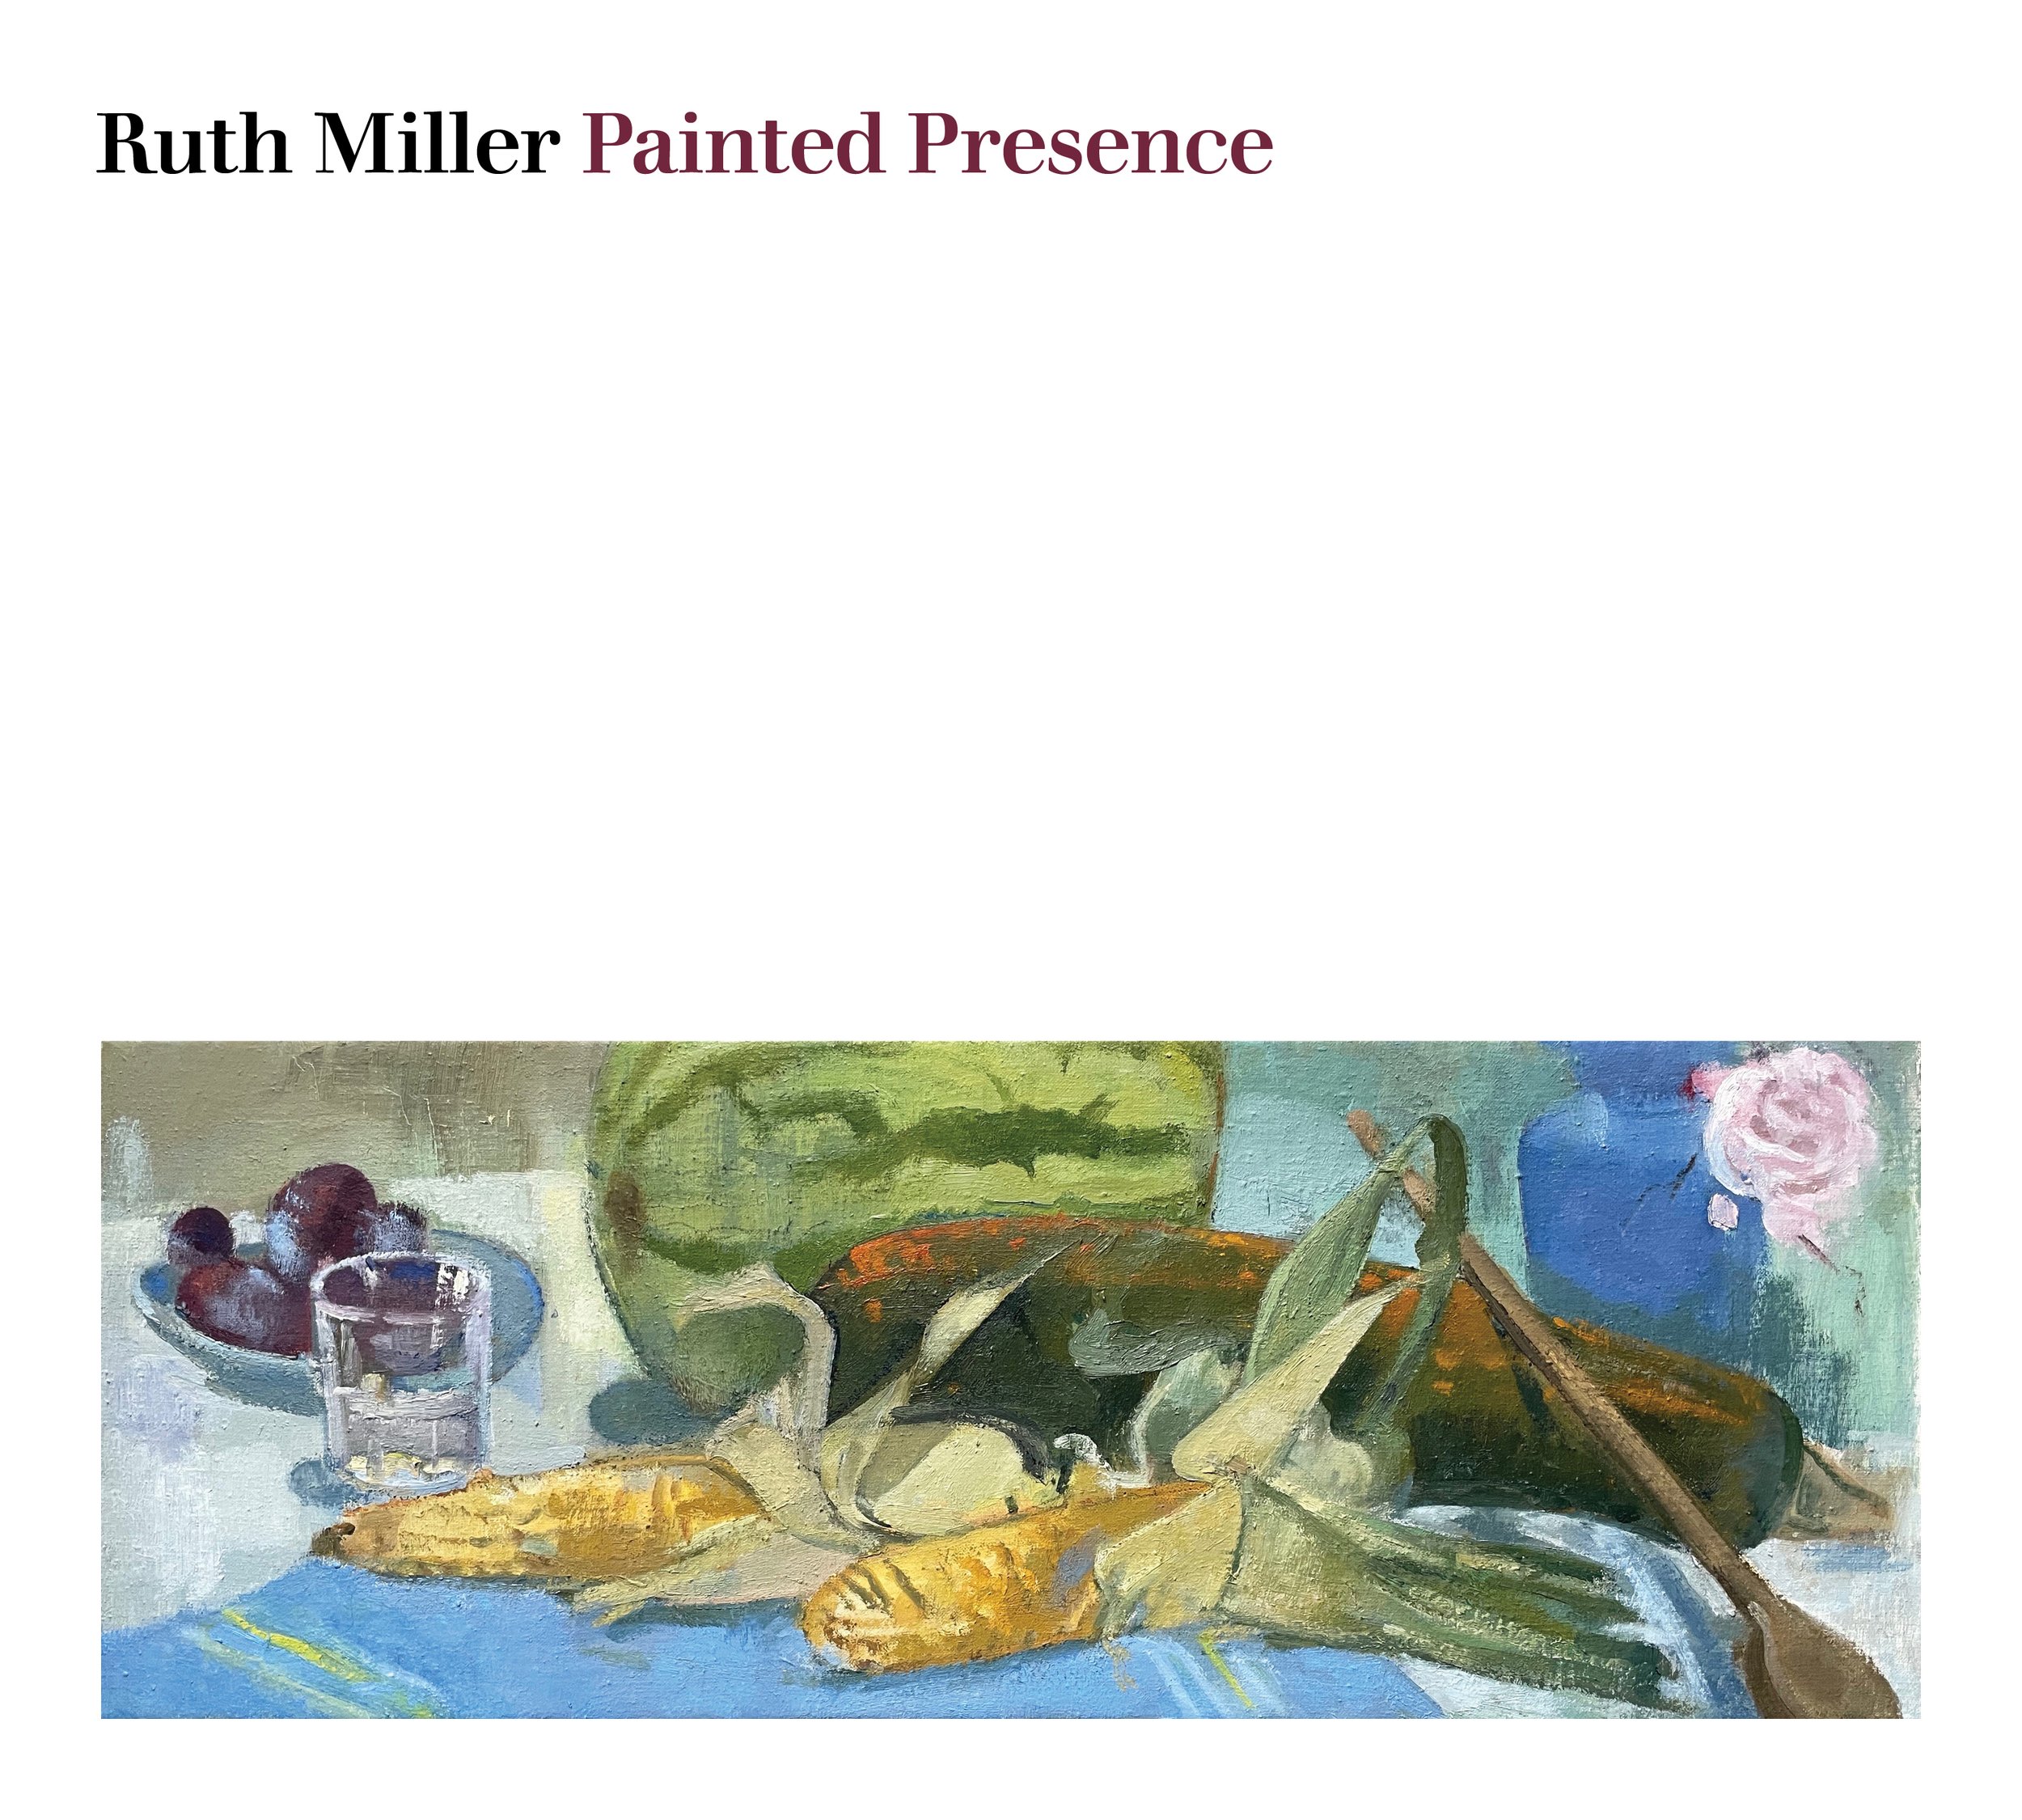 Ruth Miller: Painted Presence